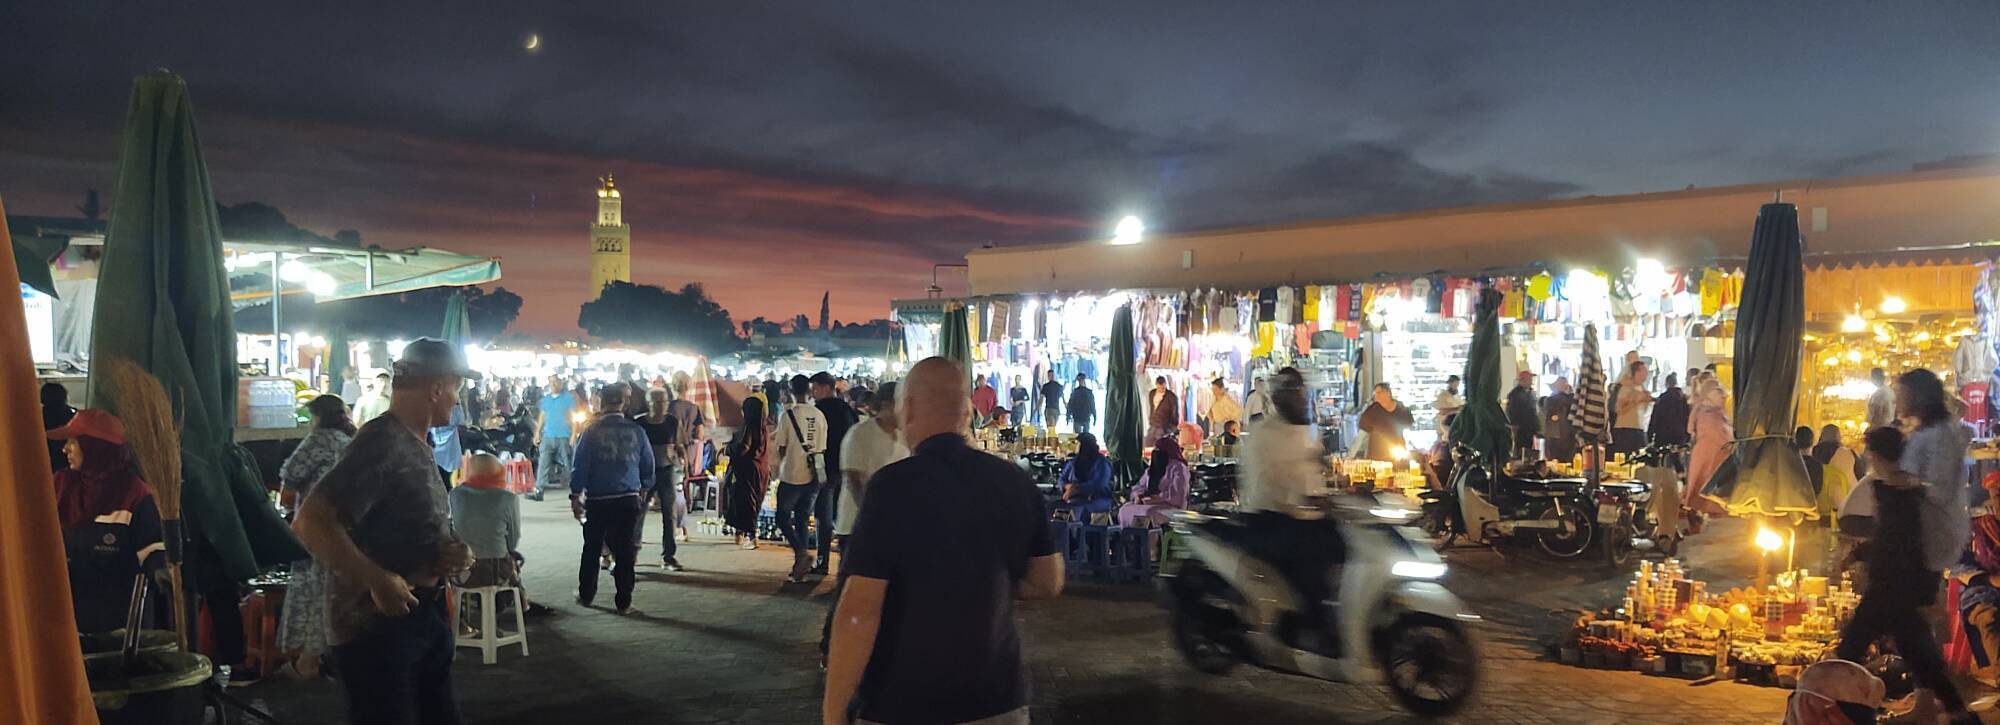 ALT: Vendors, cooks, and visitors on the Jemaa el-Fnaa in Marrakech. In the background, a crescent moon shines above the minaret of the Kutubiyya Mosque.